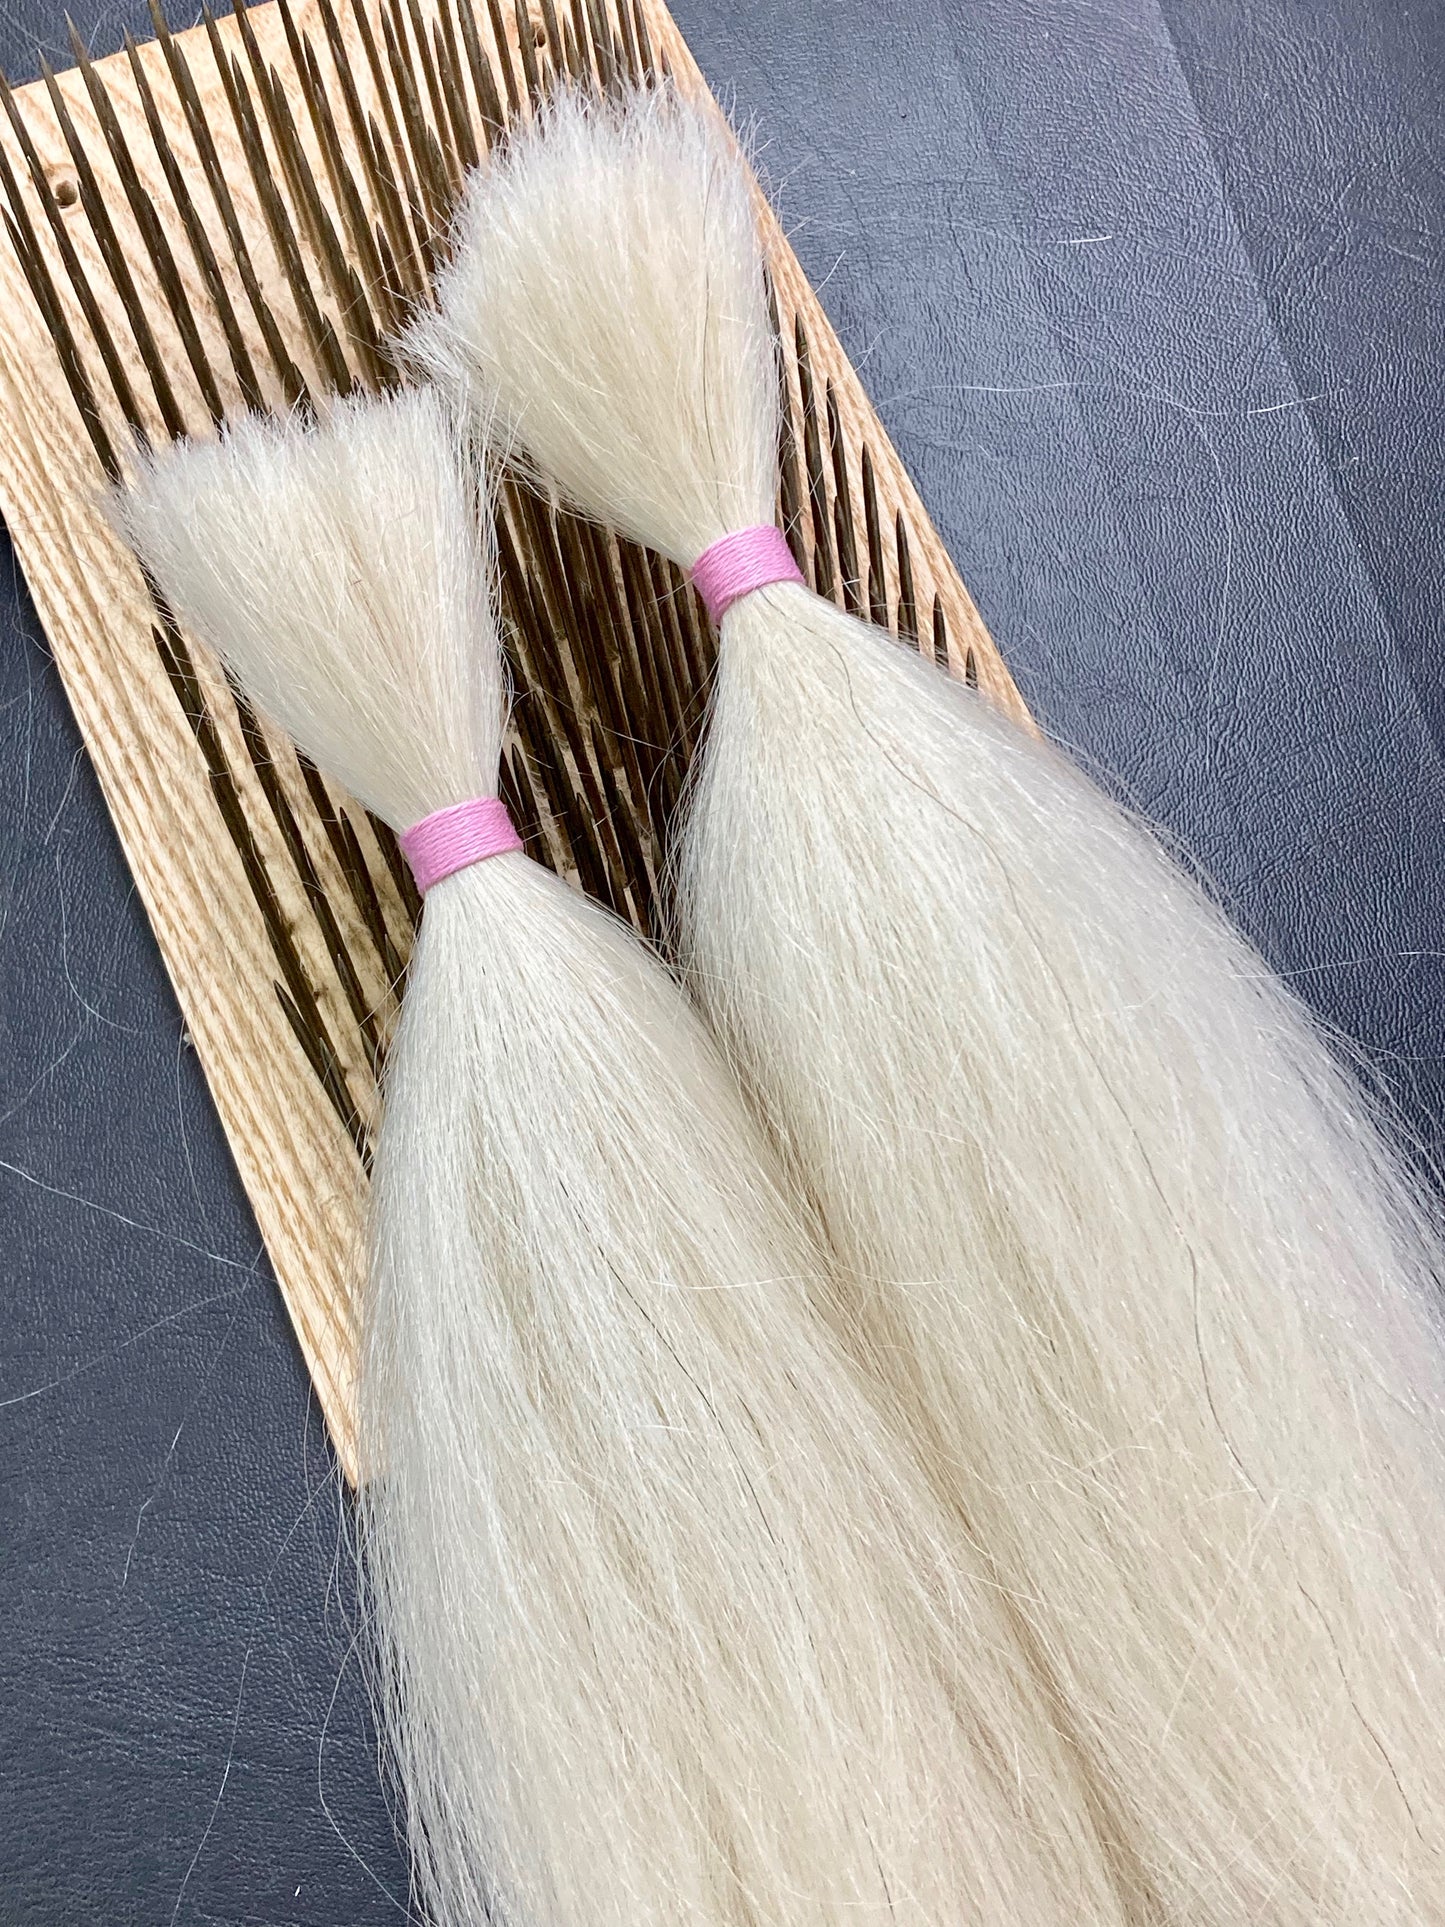 866  Luxury Soft Washed White Belly Yak - Natural White and Bright White - 30 Gram Bundle